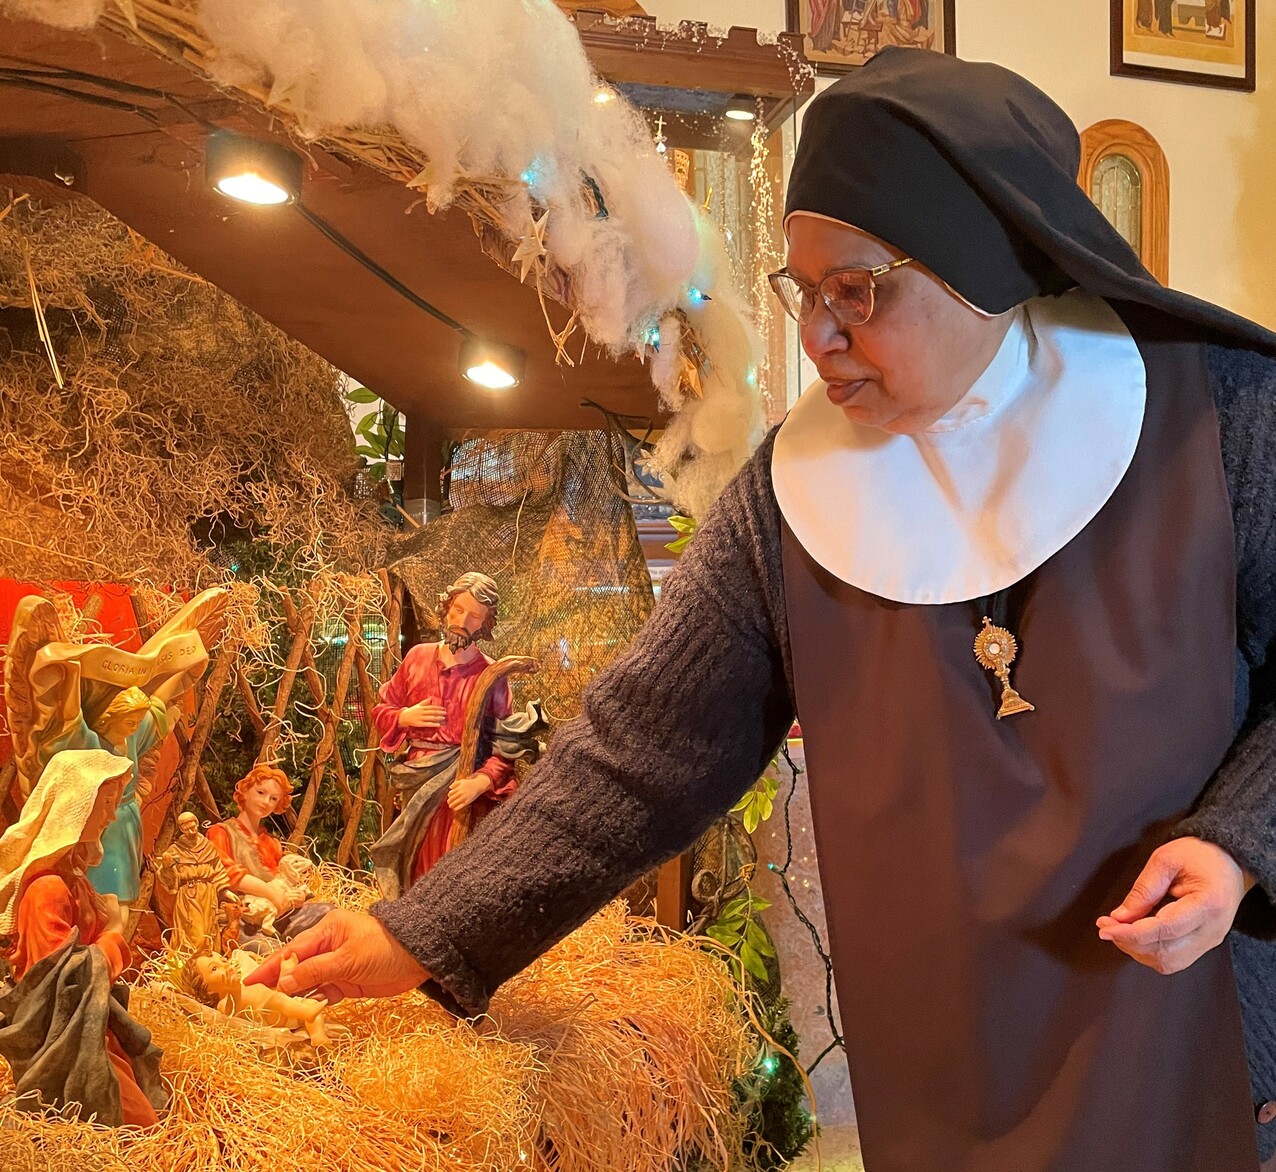 Fundraising to support Poor Clares of Perpetual Adoration continues through holiday season